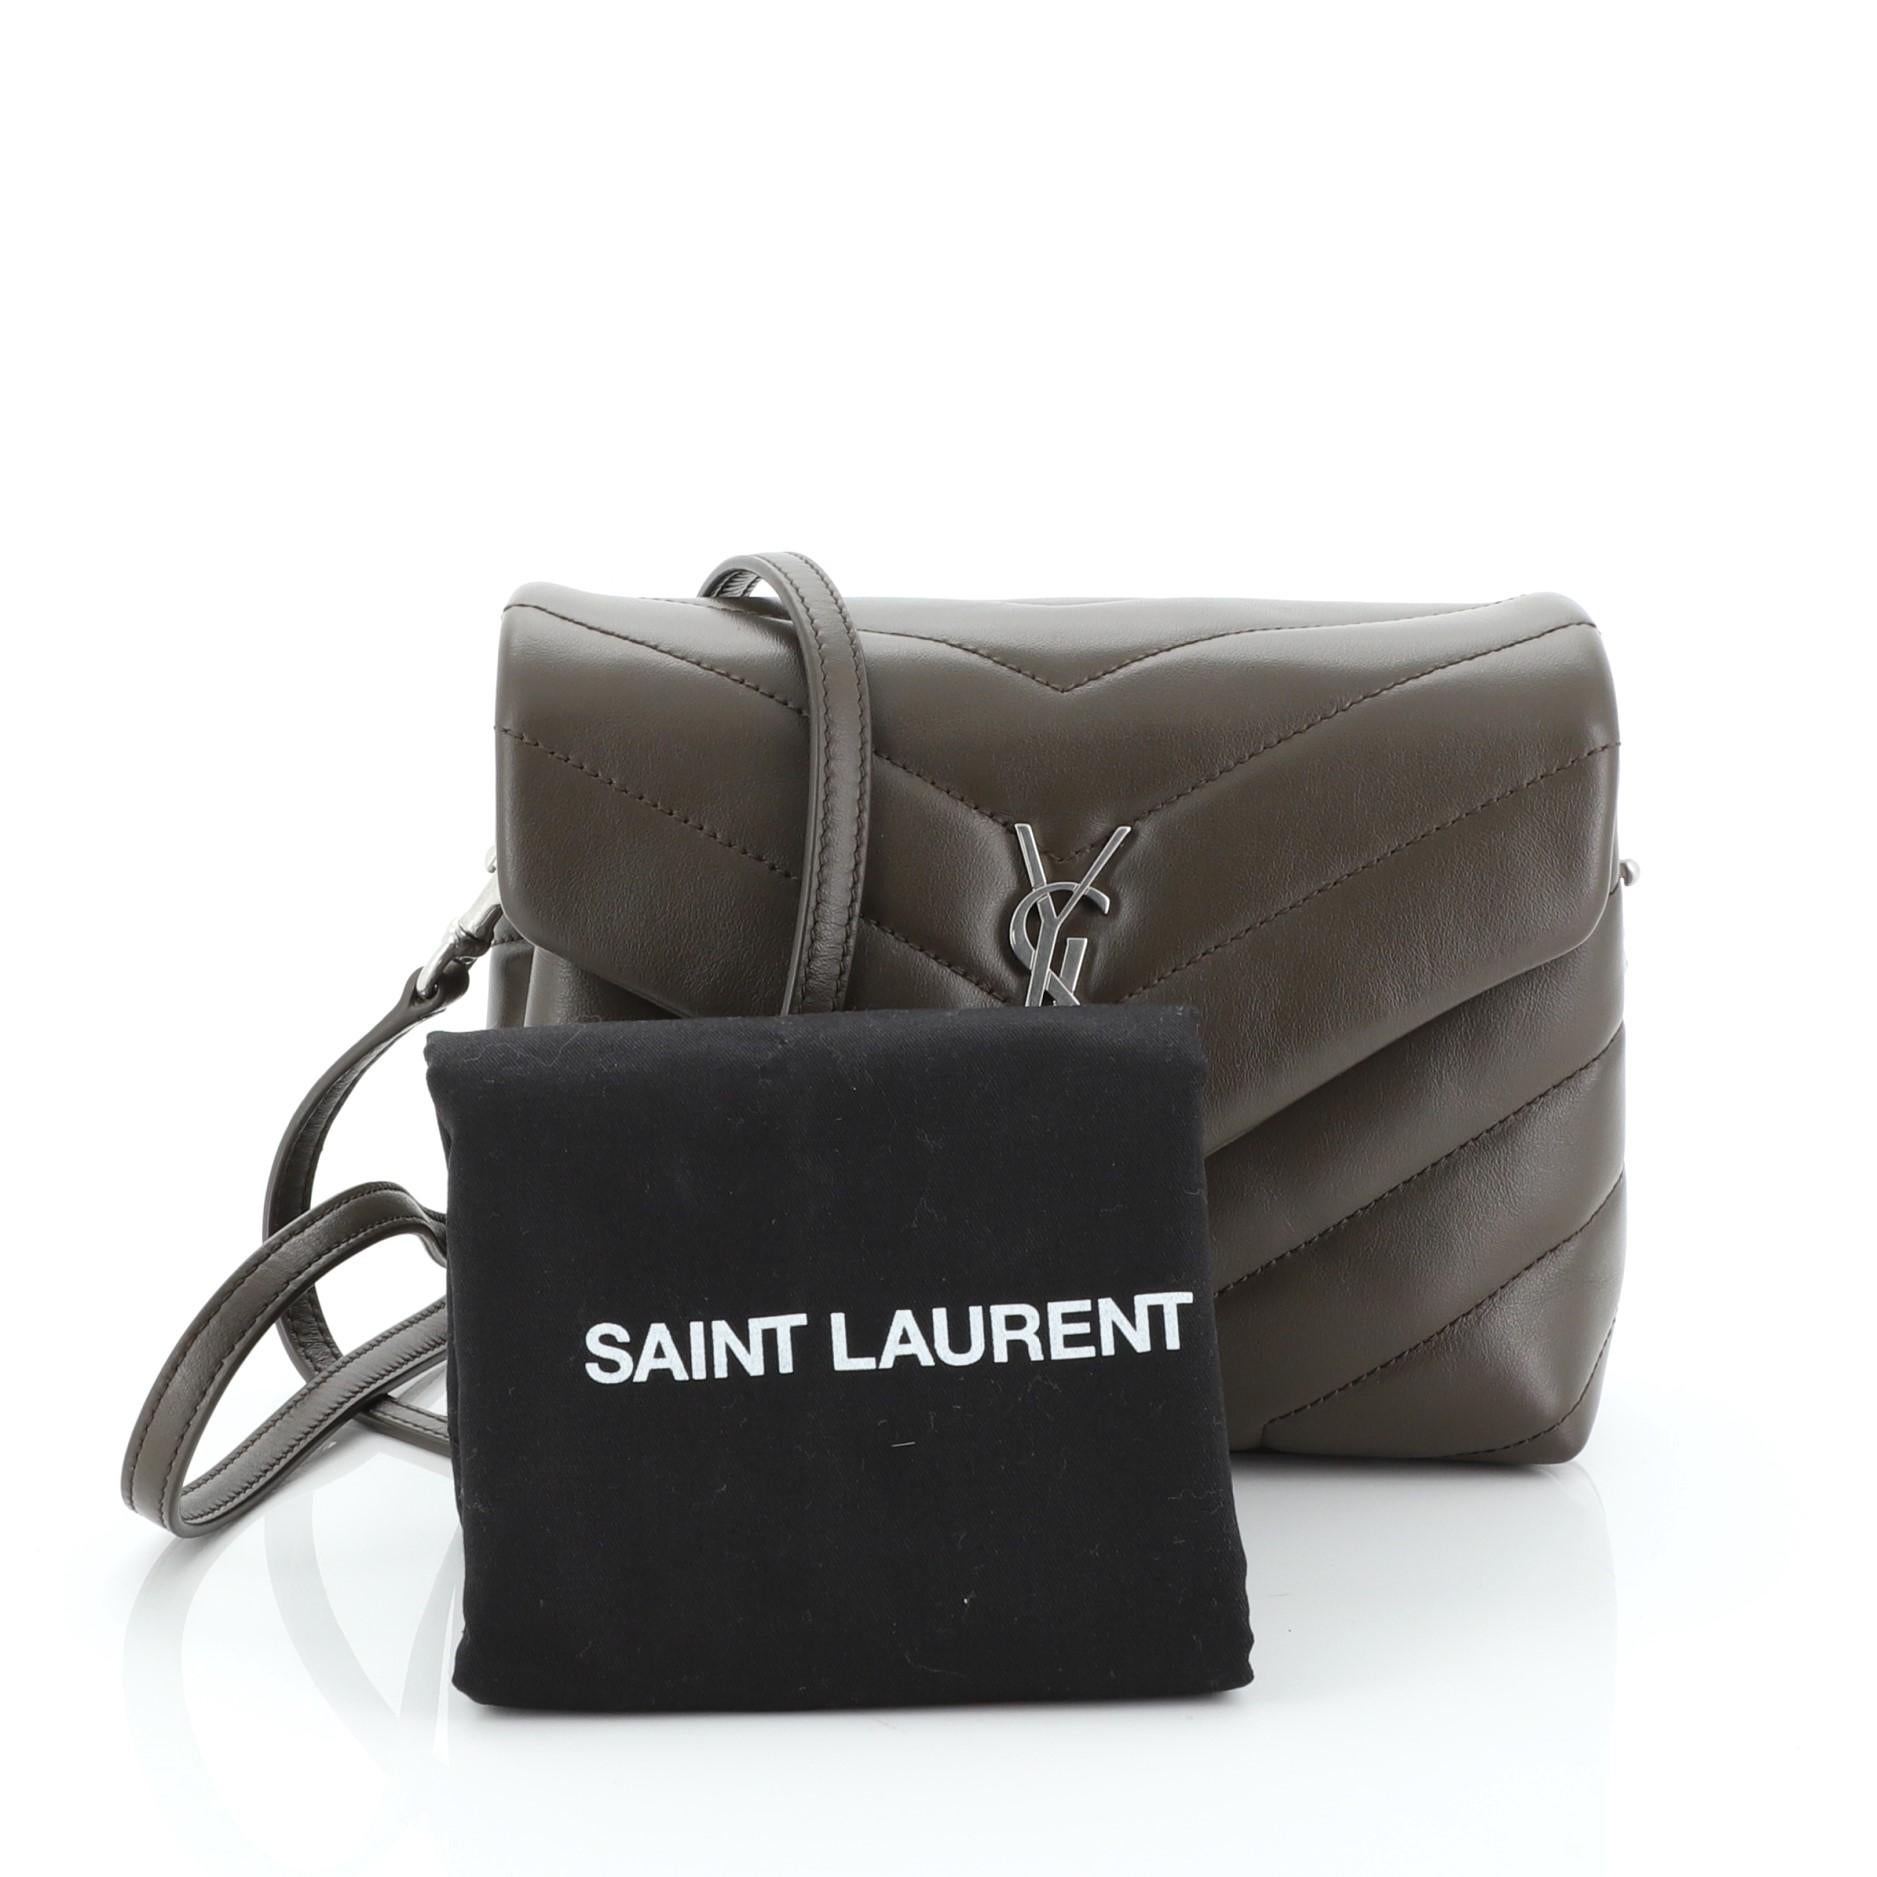 This Saint Laurent LouLou Shoulder Bag Matelasse Chevron Leather Toy, crafted in neutral matelasse chevron leather, features a long leather strap and silver-tone hardware. Its magnetic snap closure opens to a black fabric interior divided into two